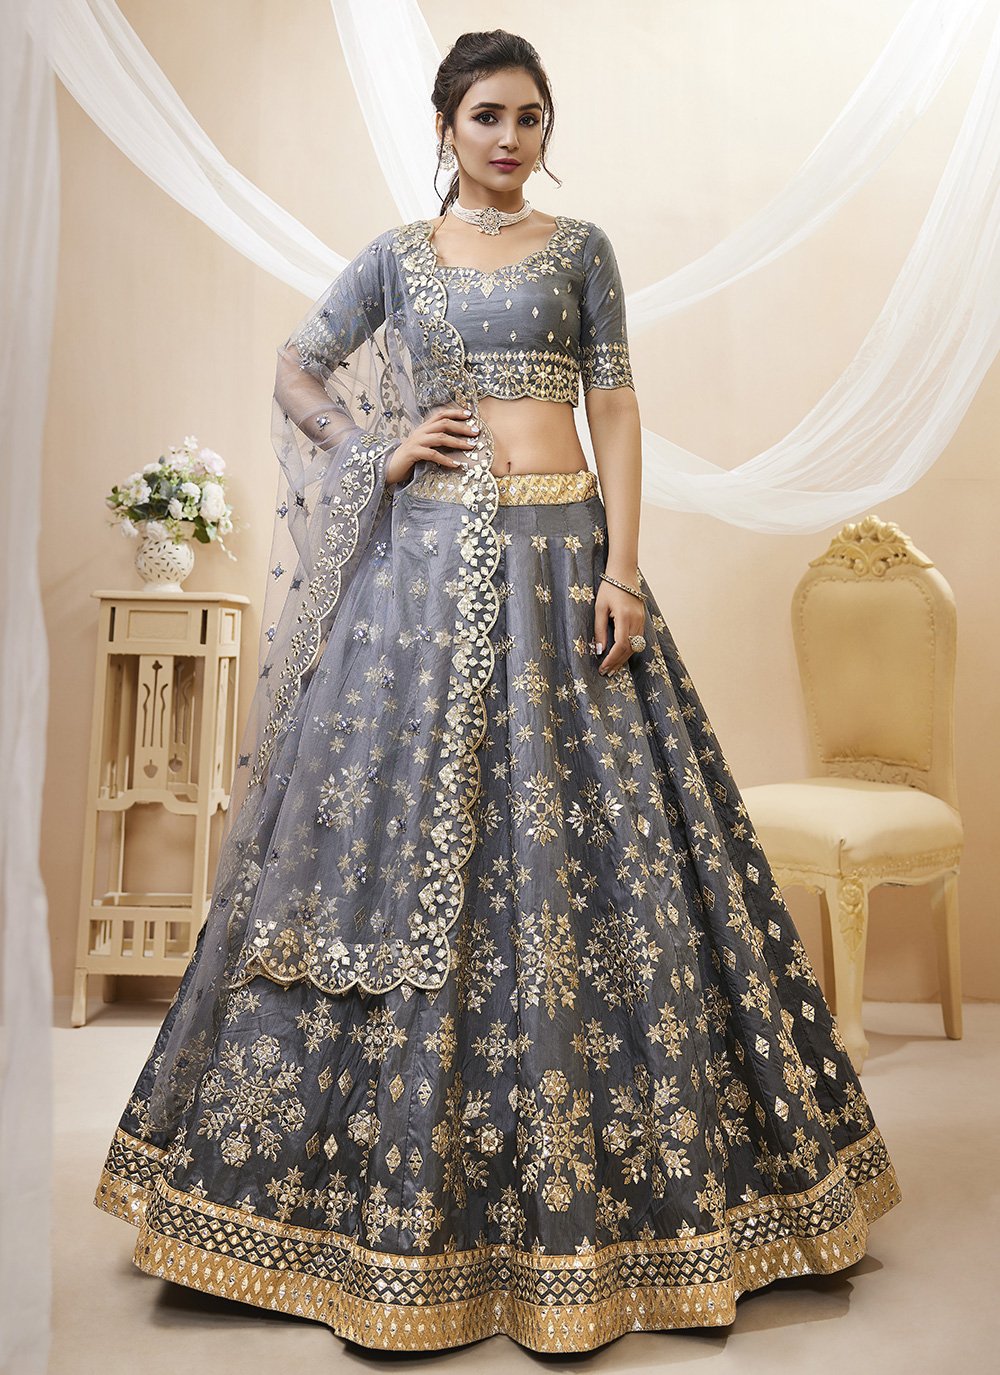 Drop Dead Gorgeous Lehenga Designs for Engagement & Places to Buy Them From